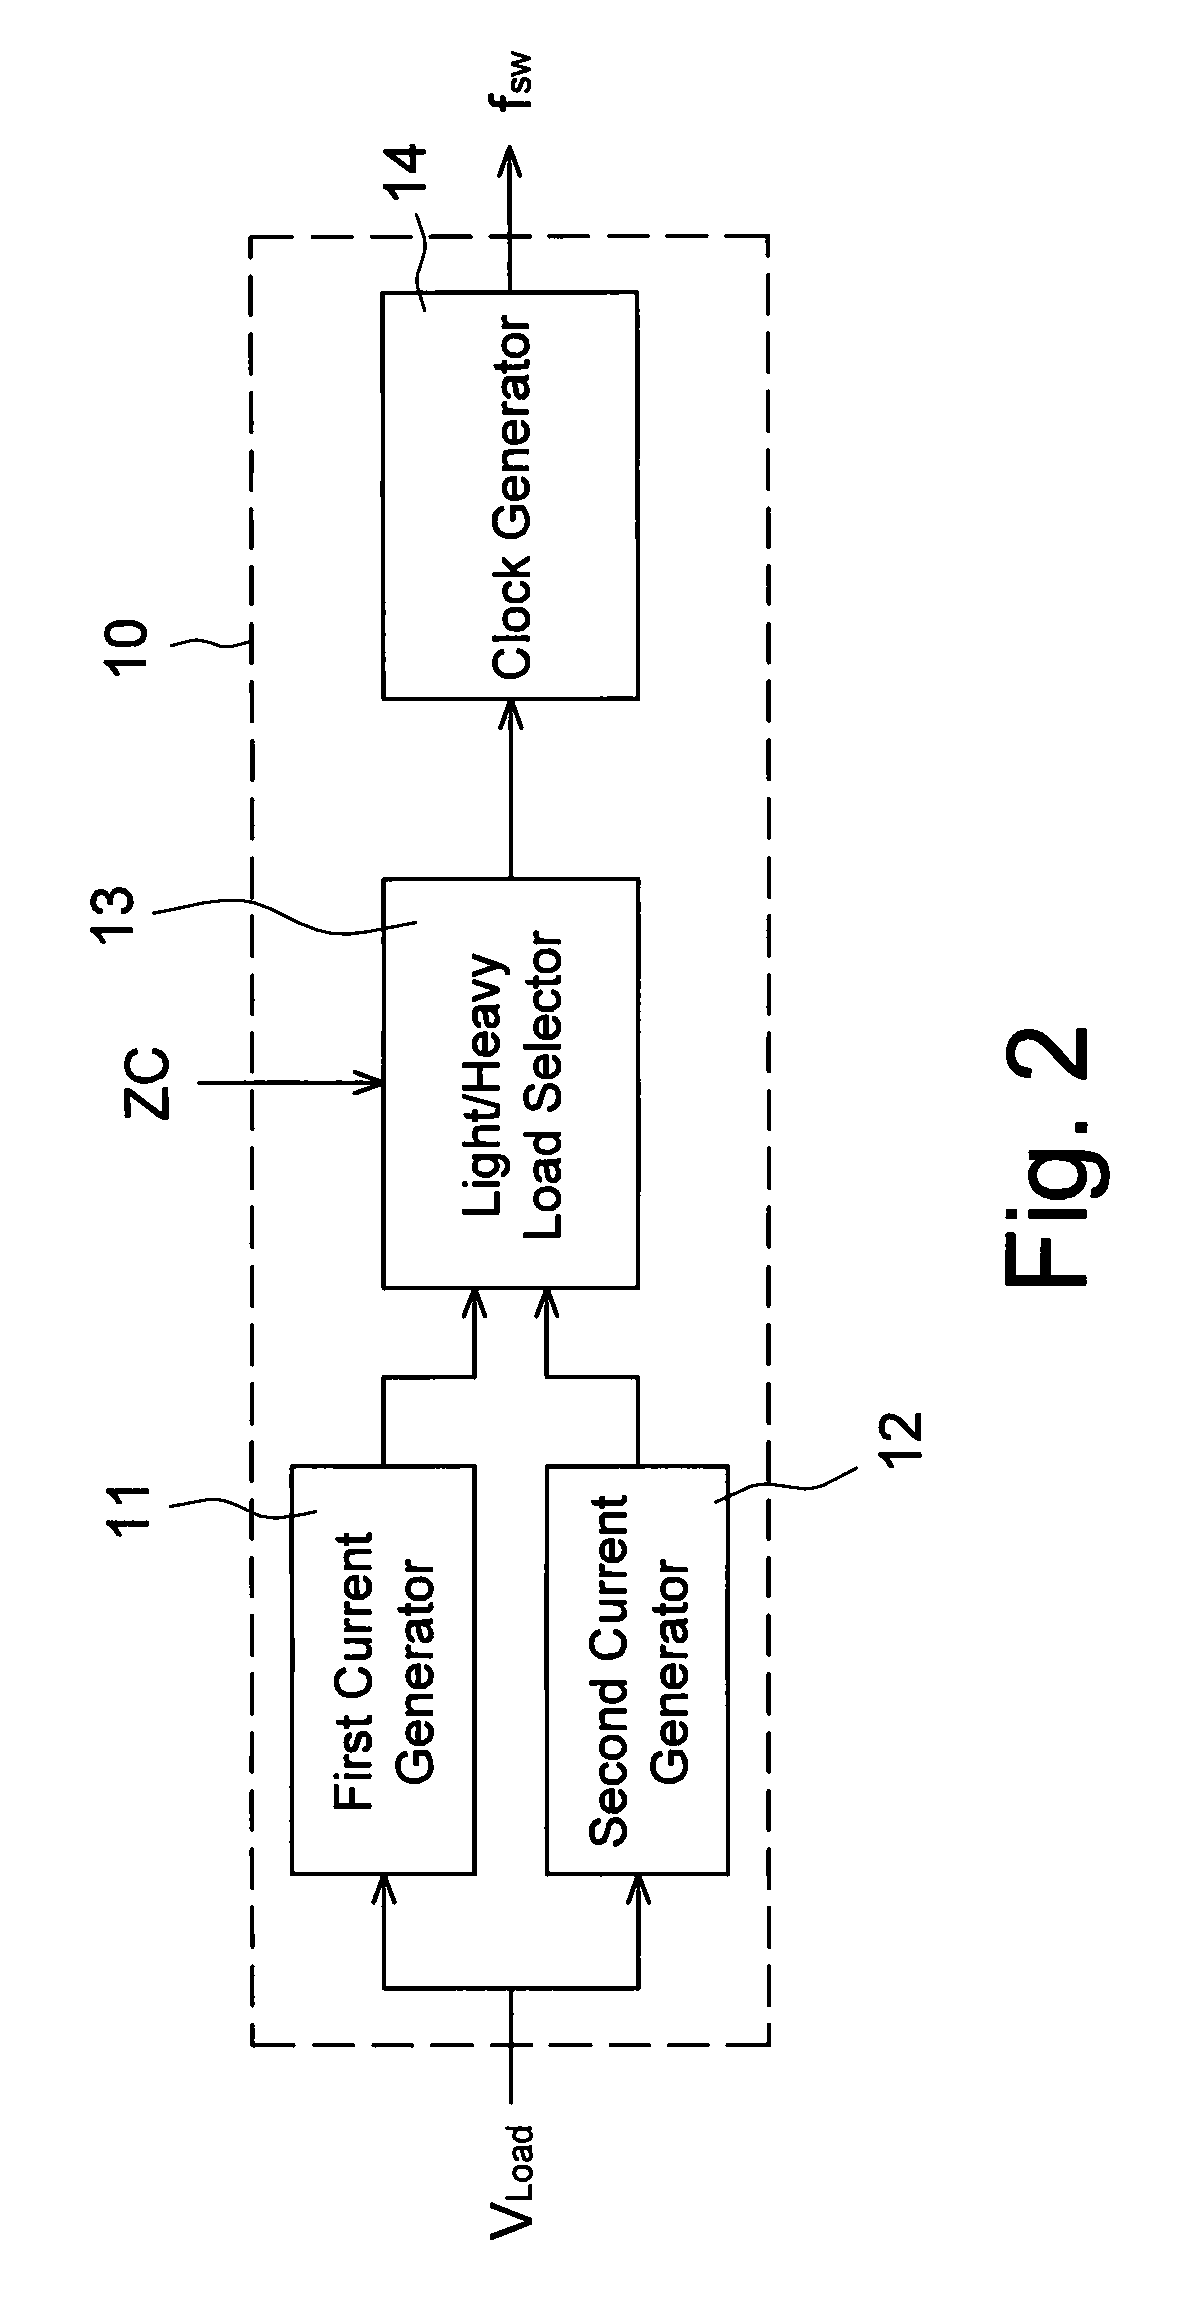 Analog variable-frequency controller and switching converter therewith